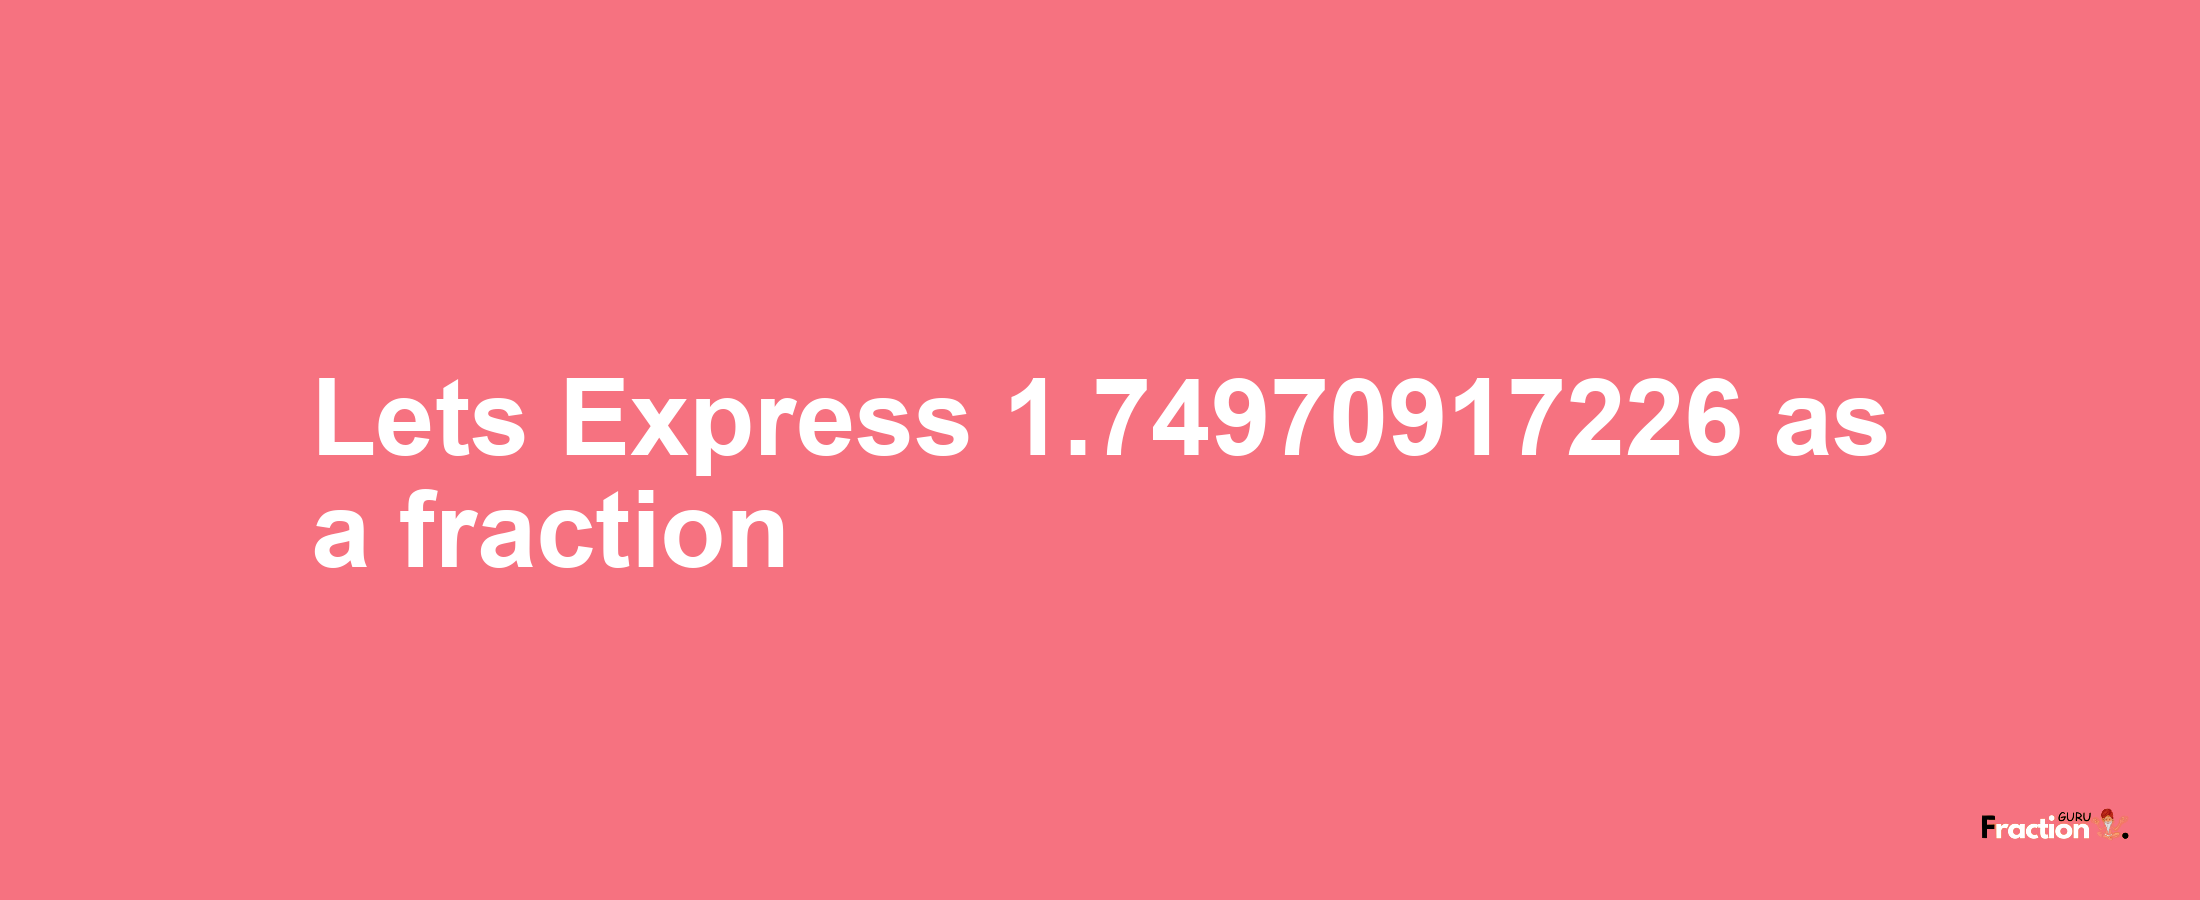 Lets Express 1.74970917226 as afraction